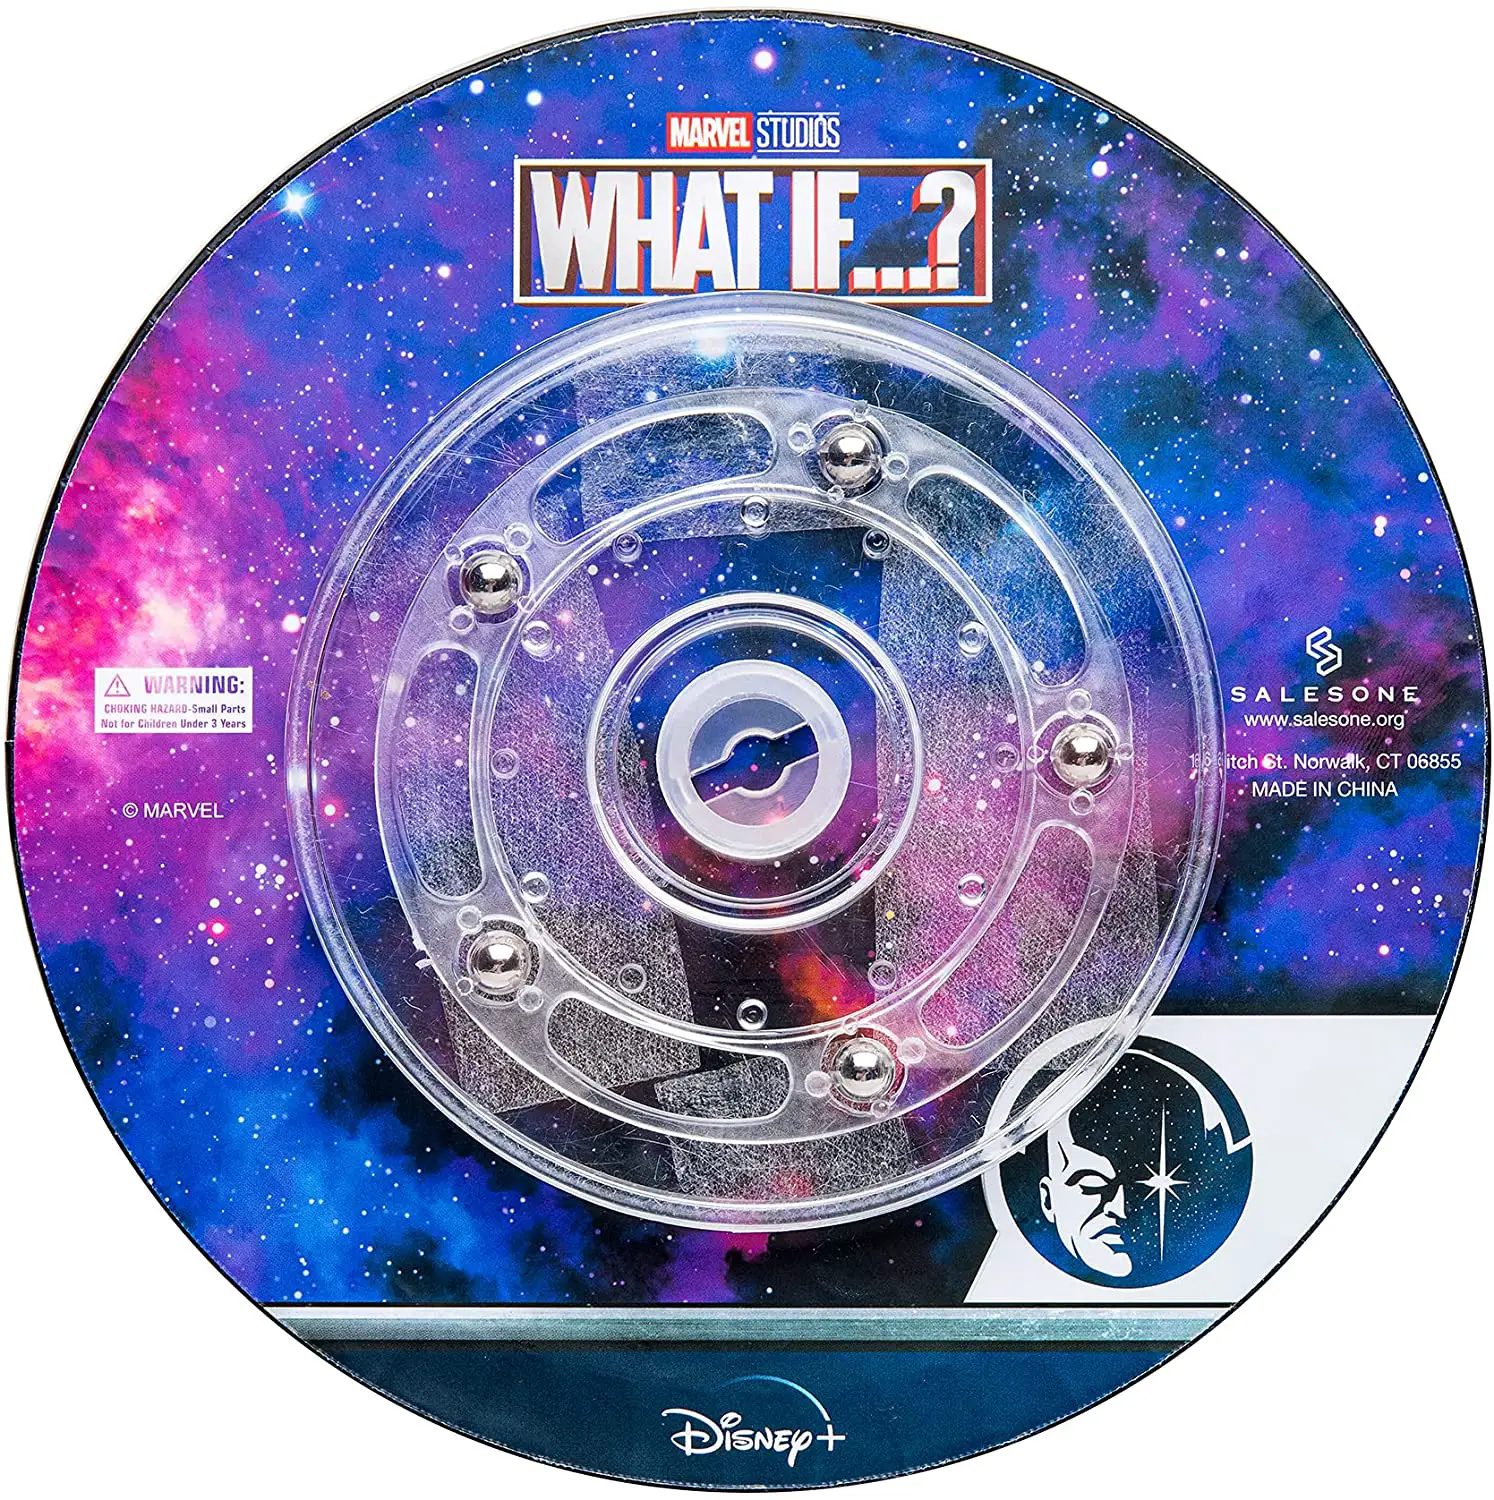 Marvel Disney + What if…? Captain Carter Metal-Based with Enamel 5 Pin Set Comes in an Officially Licensed Spinning 16cm Circular Window Box